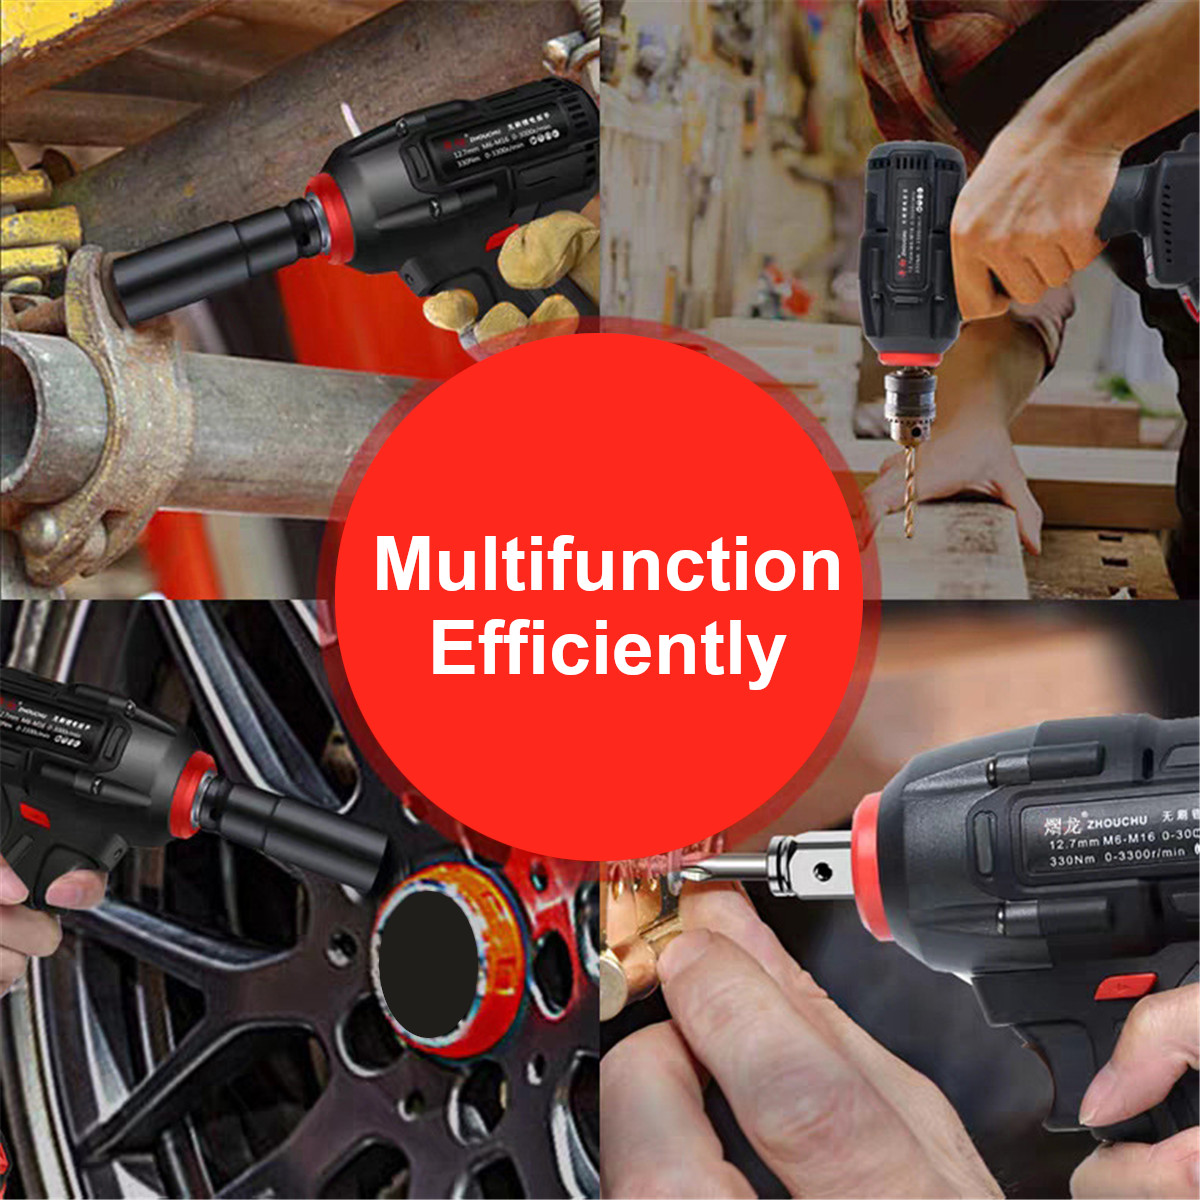 100-240V-21V-Cordless-Brushless-Electric-Wrench-600Nm-Impact-Wrench-20000mAh-Recharge-1790565-2